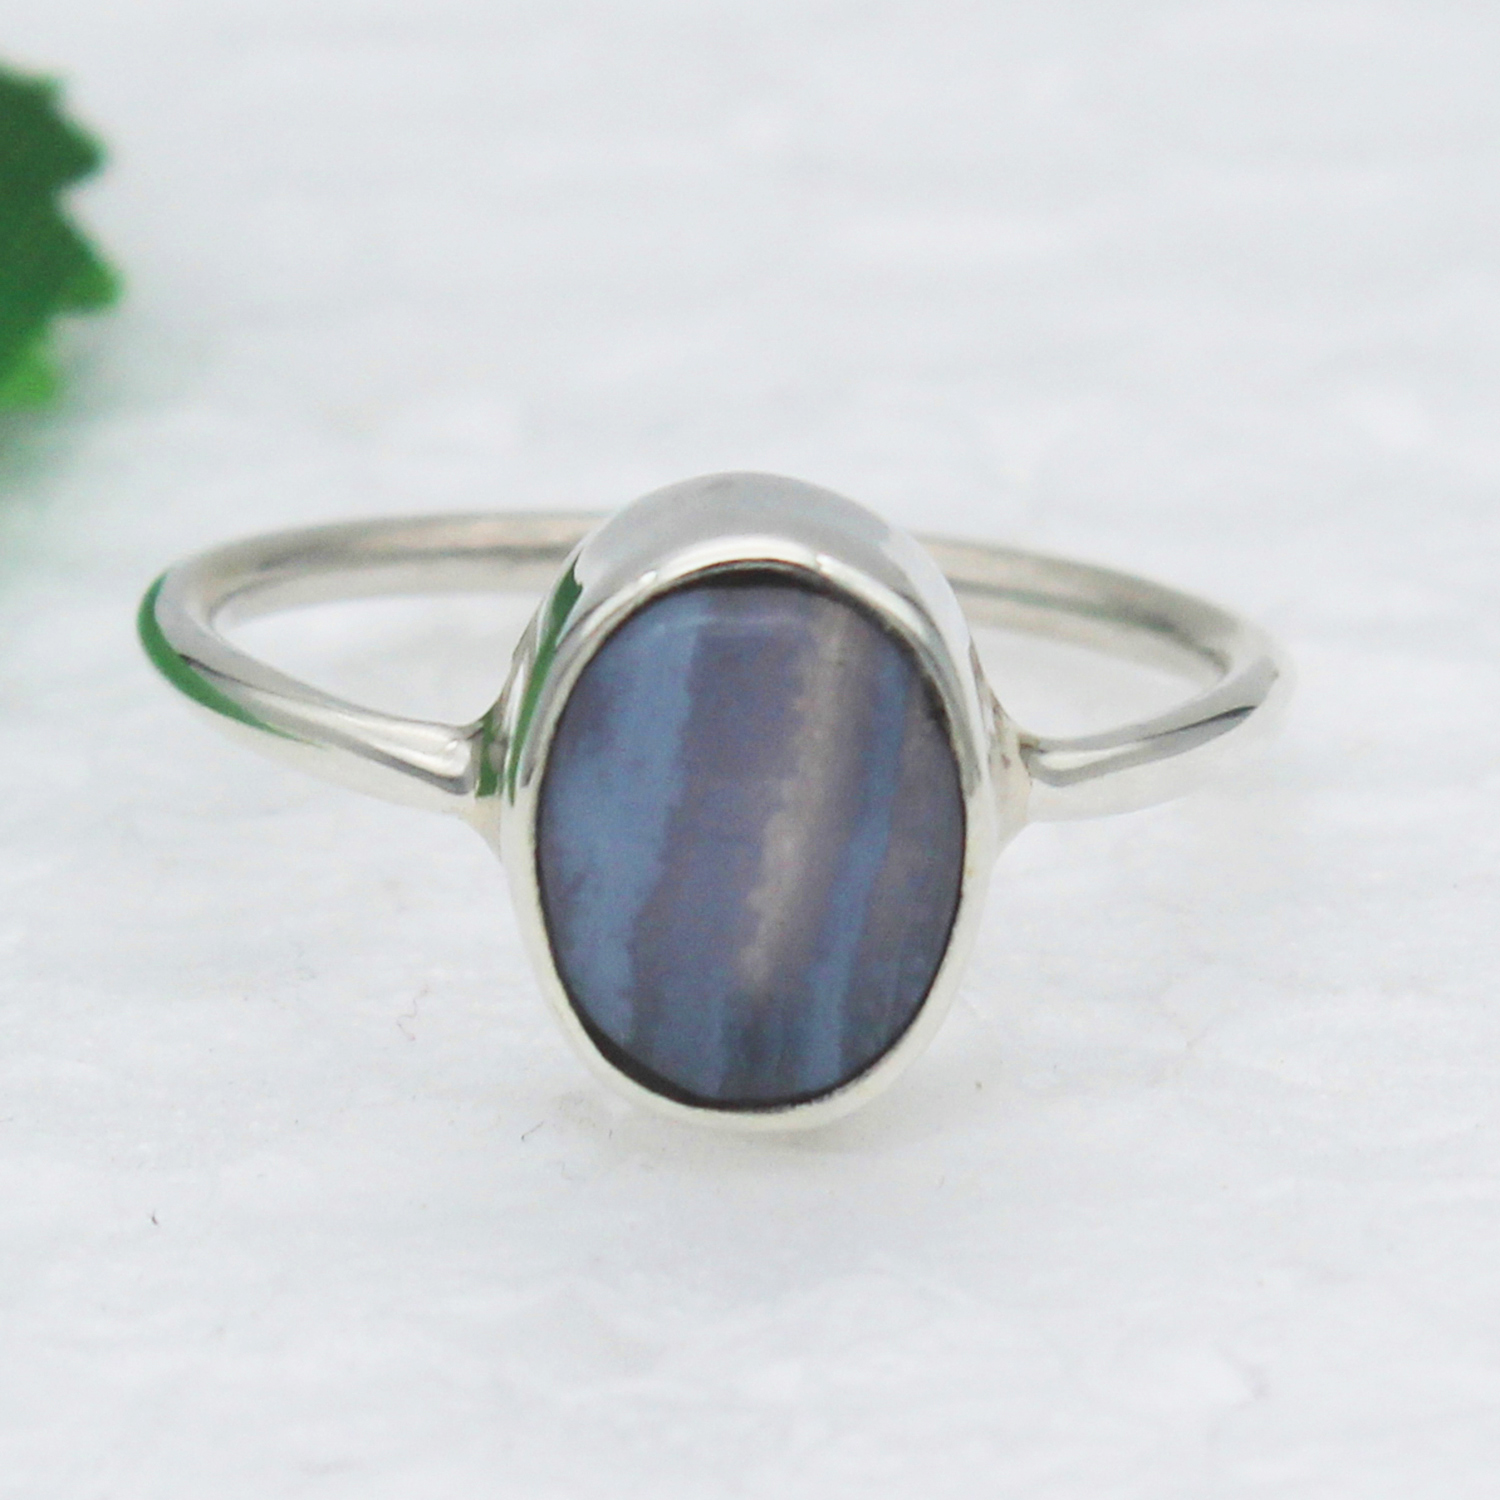 925 Sterling Silver Blue Lace Agate Ring, Handmade Jewelry, Gemstone Birthstone Ring, Gift For Women